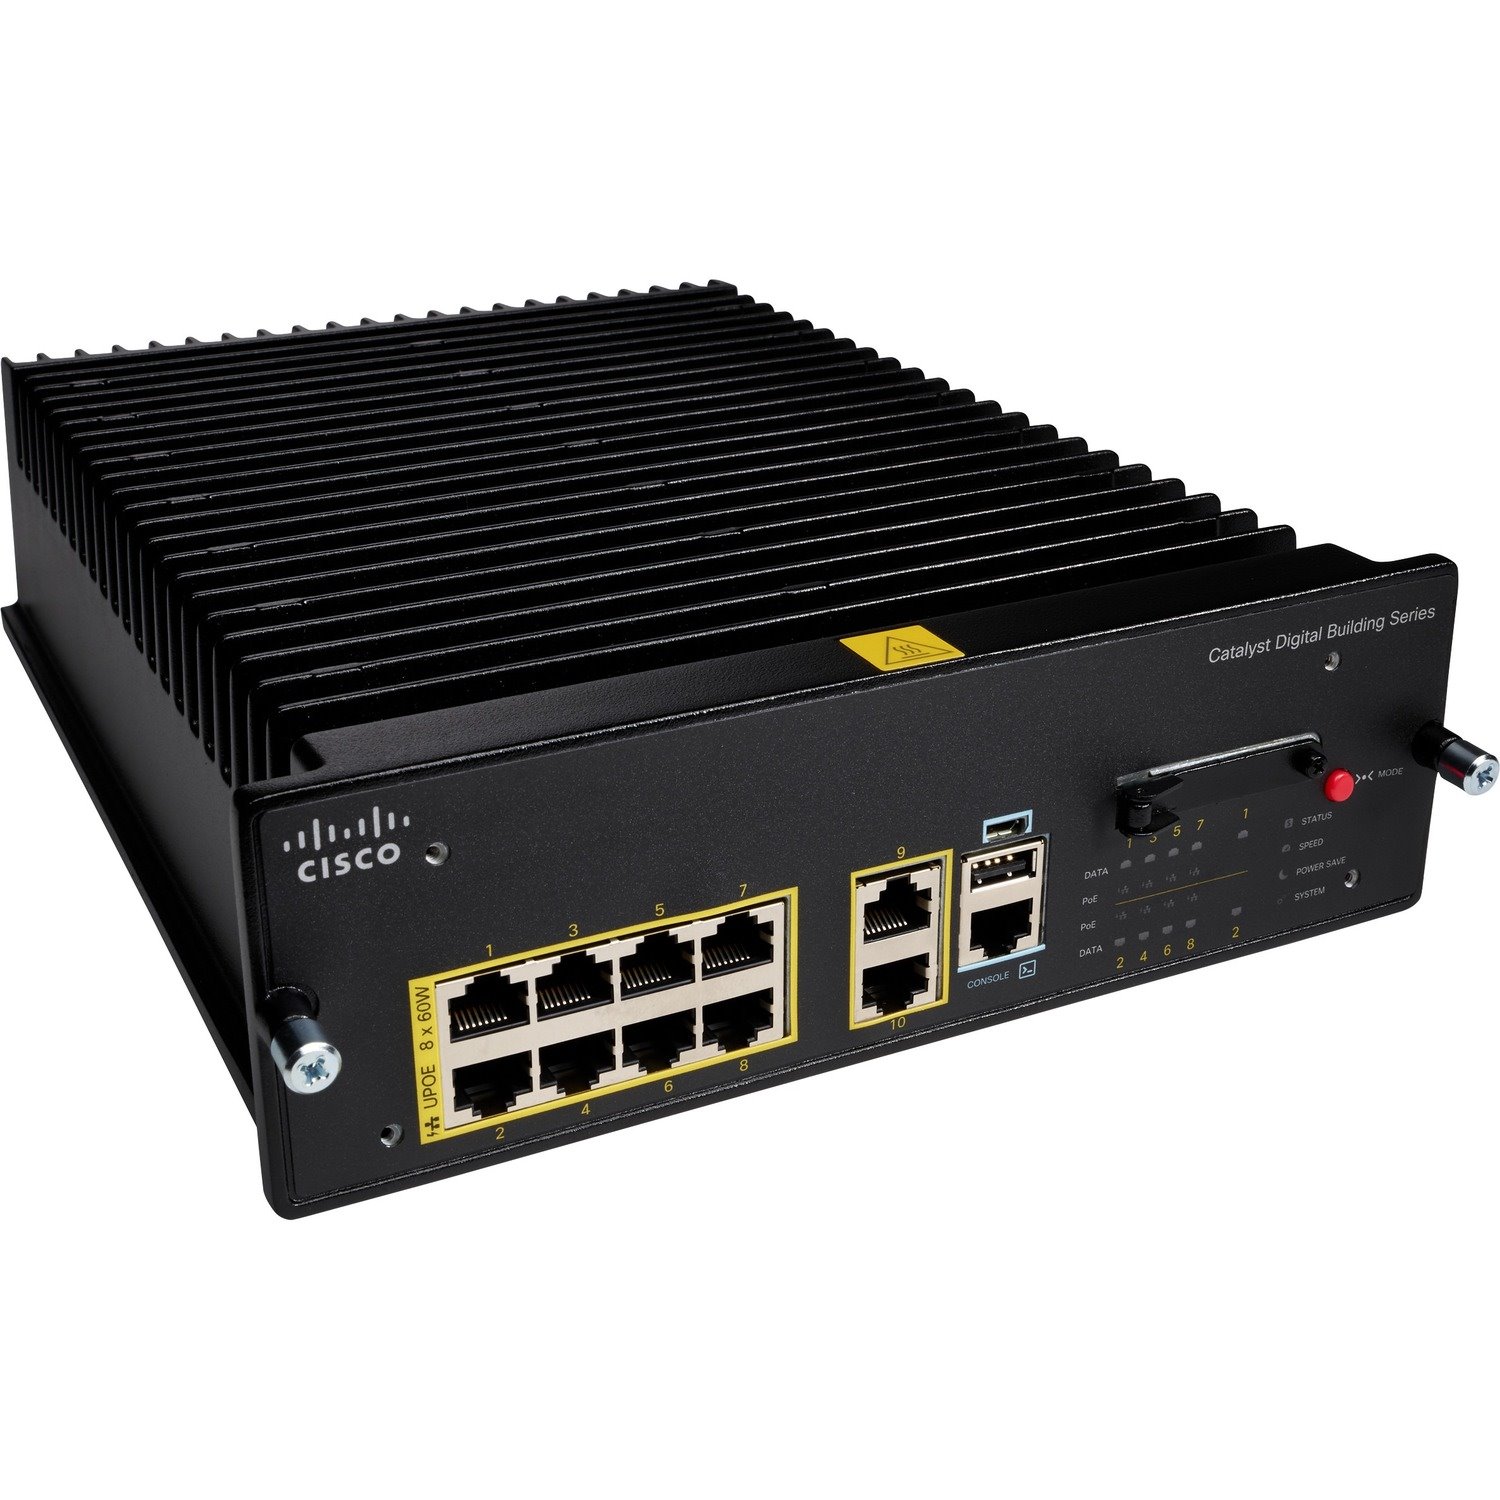 Cisco Catalyst CDB-8P 8 Ports Manageable Ethernet Switch